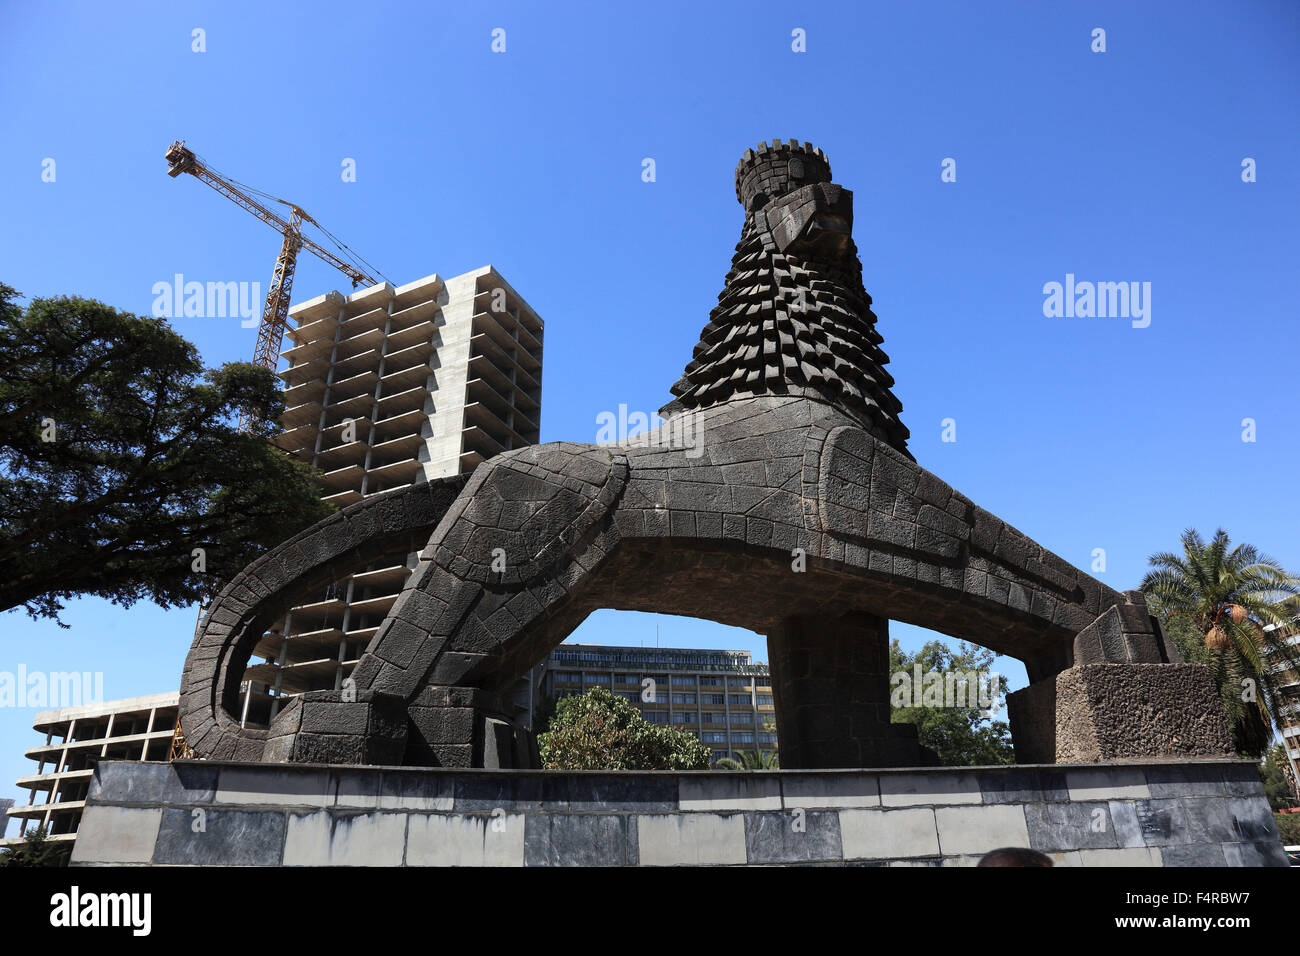 Addis Ababa, street scene in the city center, statue of a lion in front of the National Theatre Stock Photo